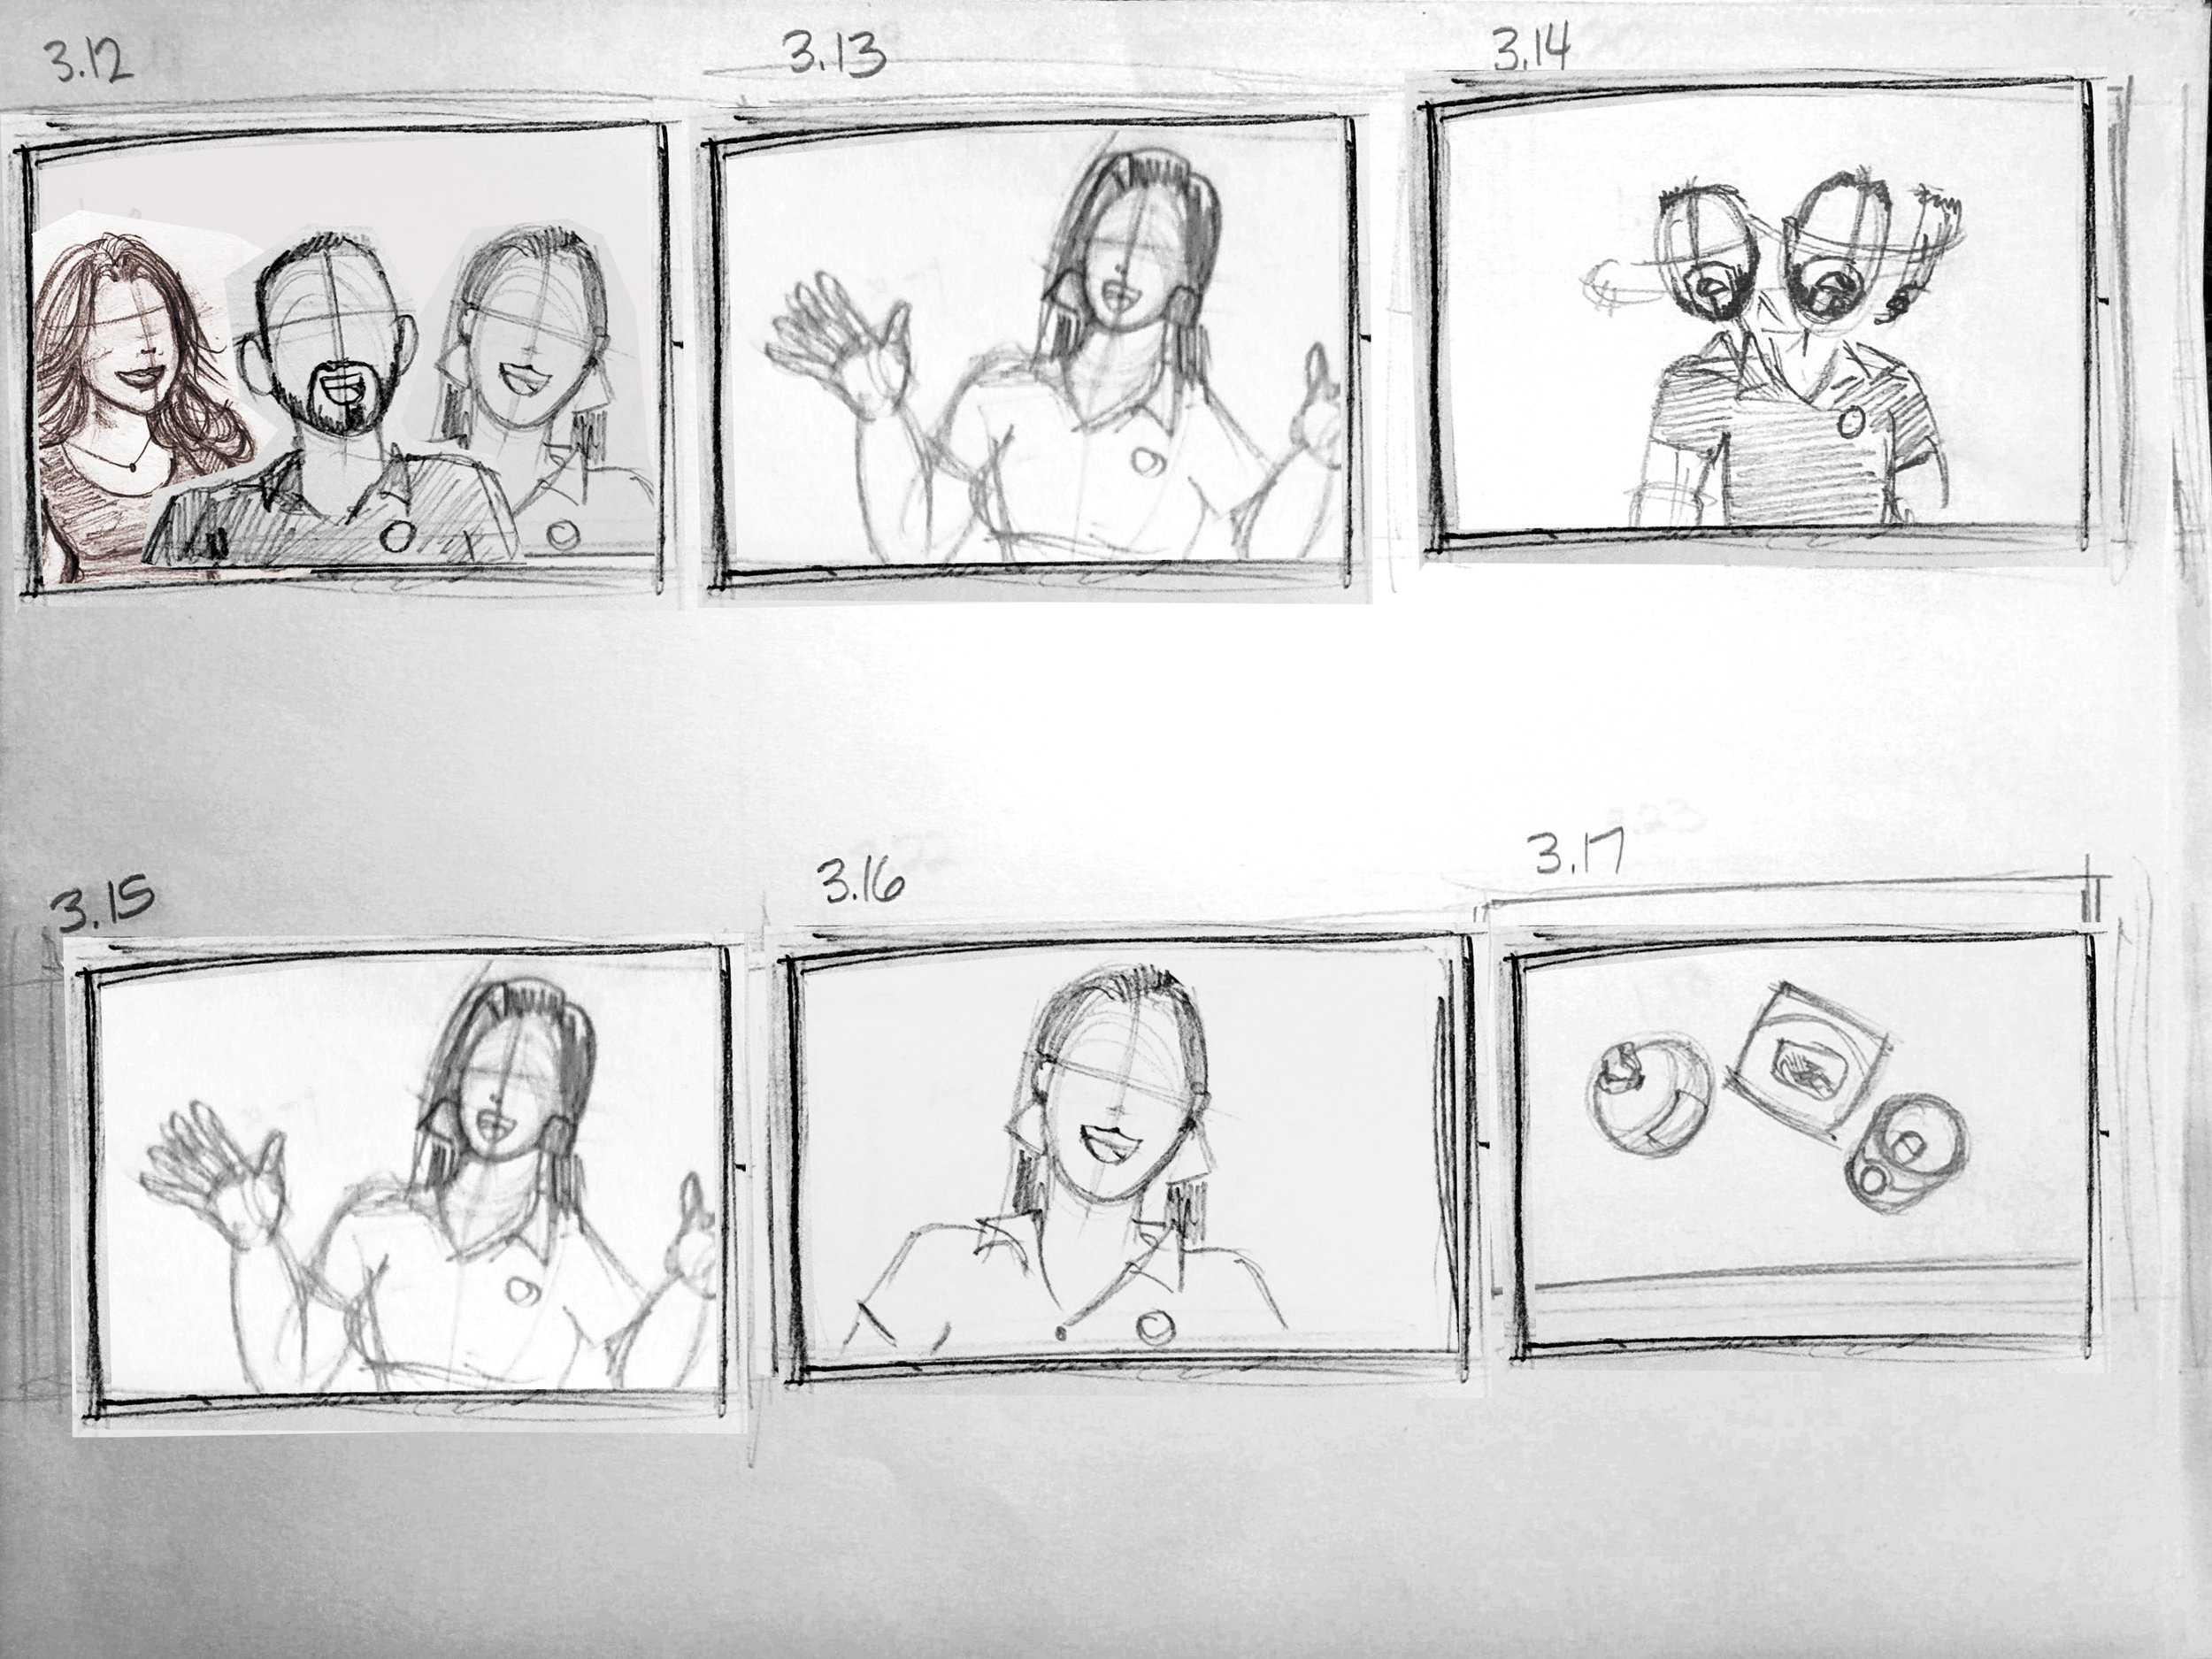 WR_Real_Suite_Eats_S1_E2_StoryBoard_Frames_3_12_to_3_17.jpg